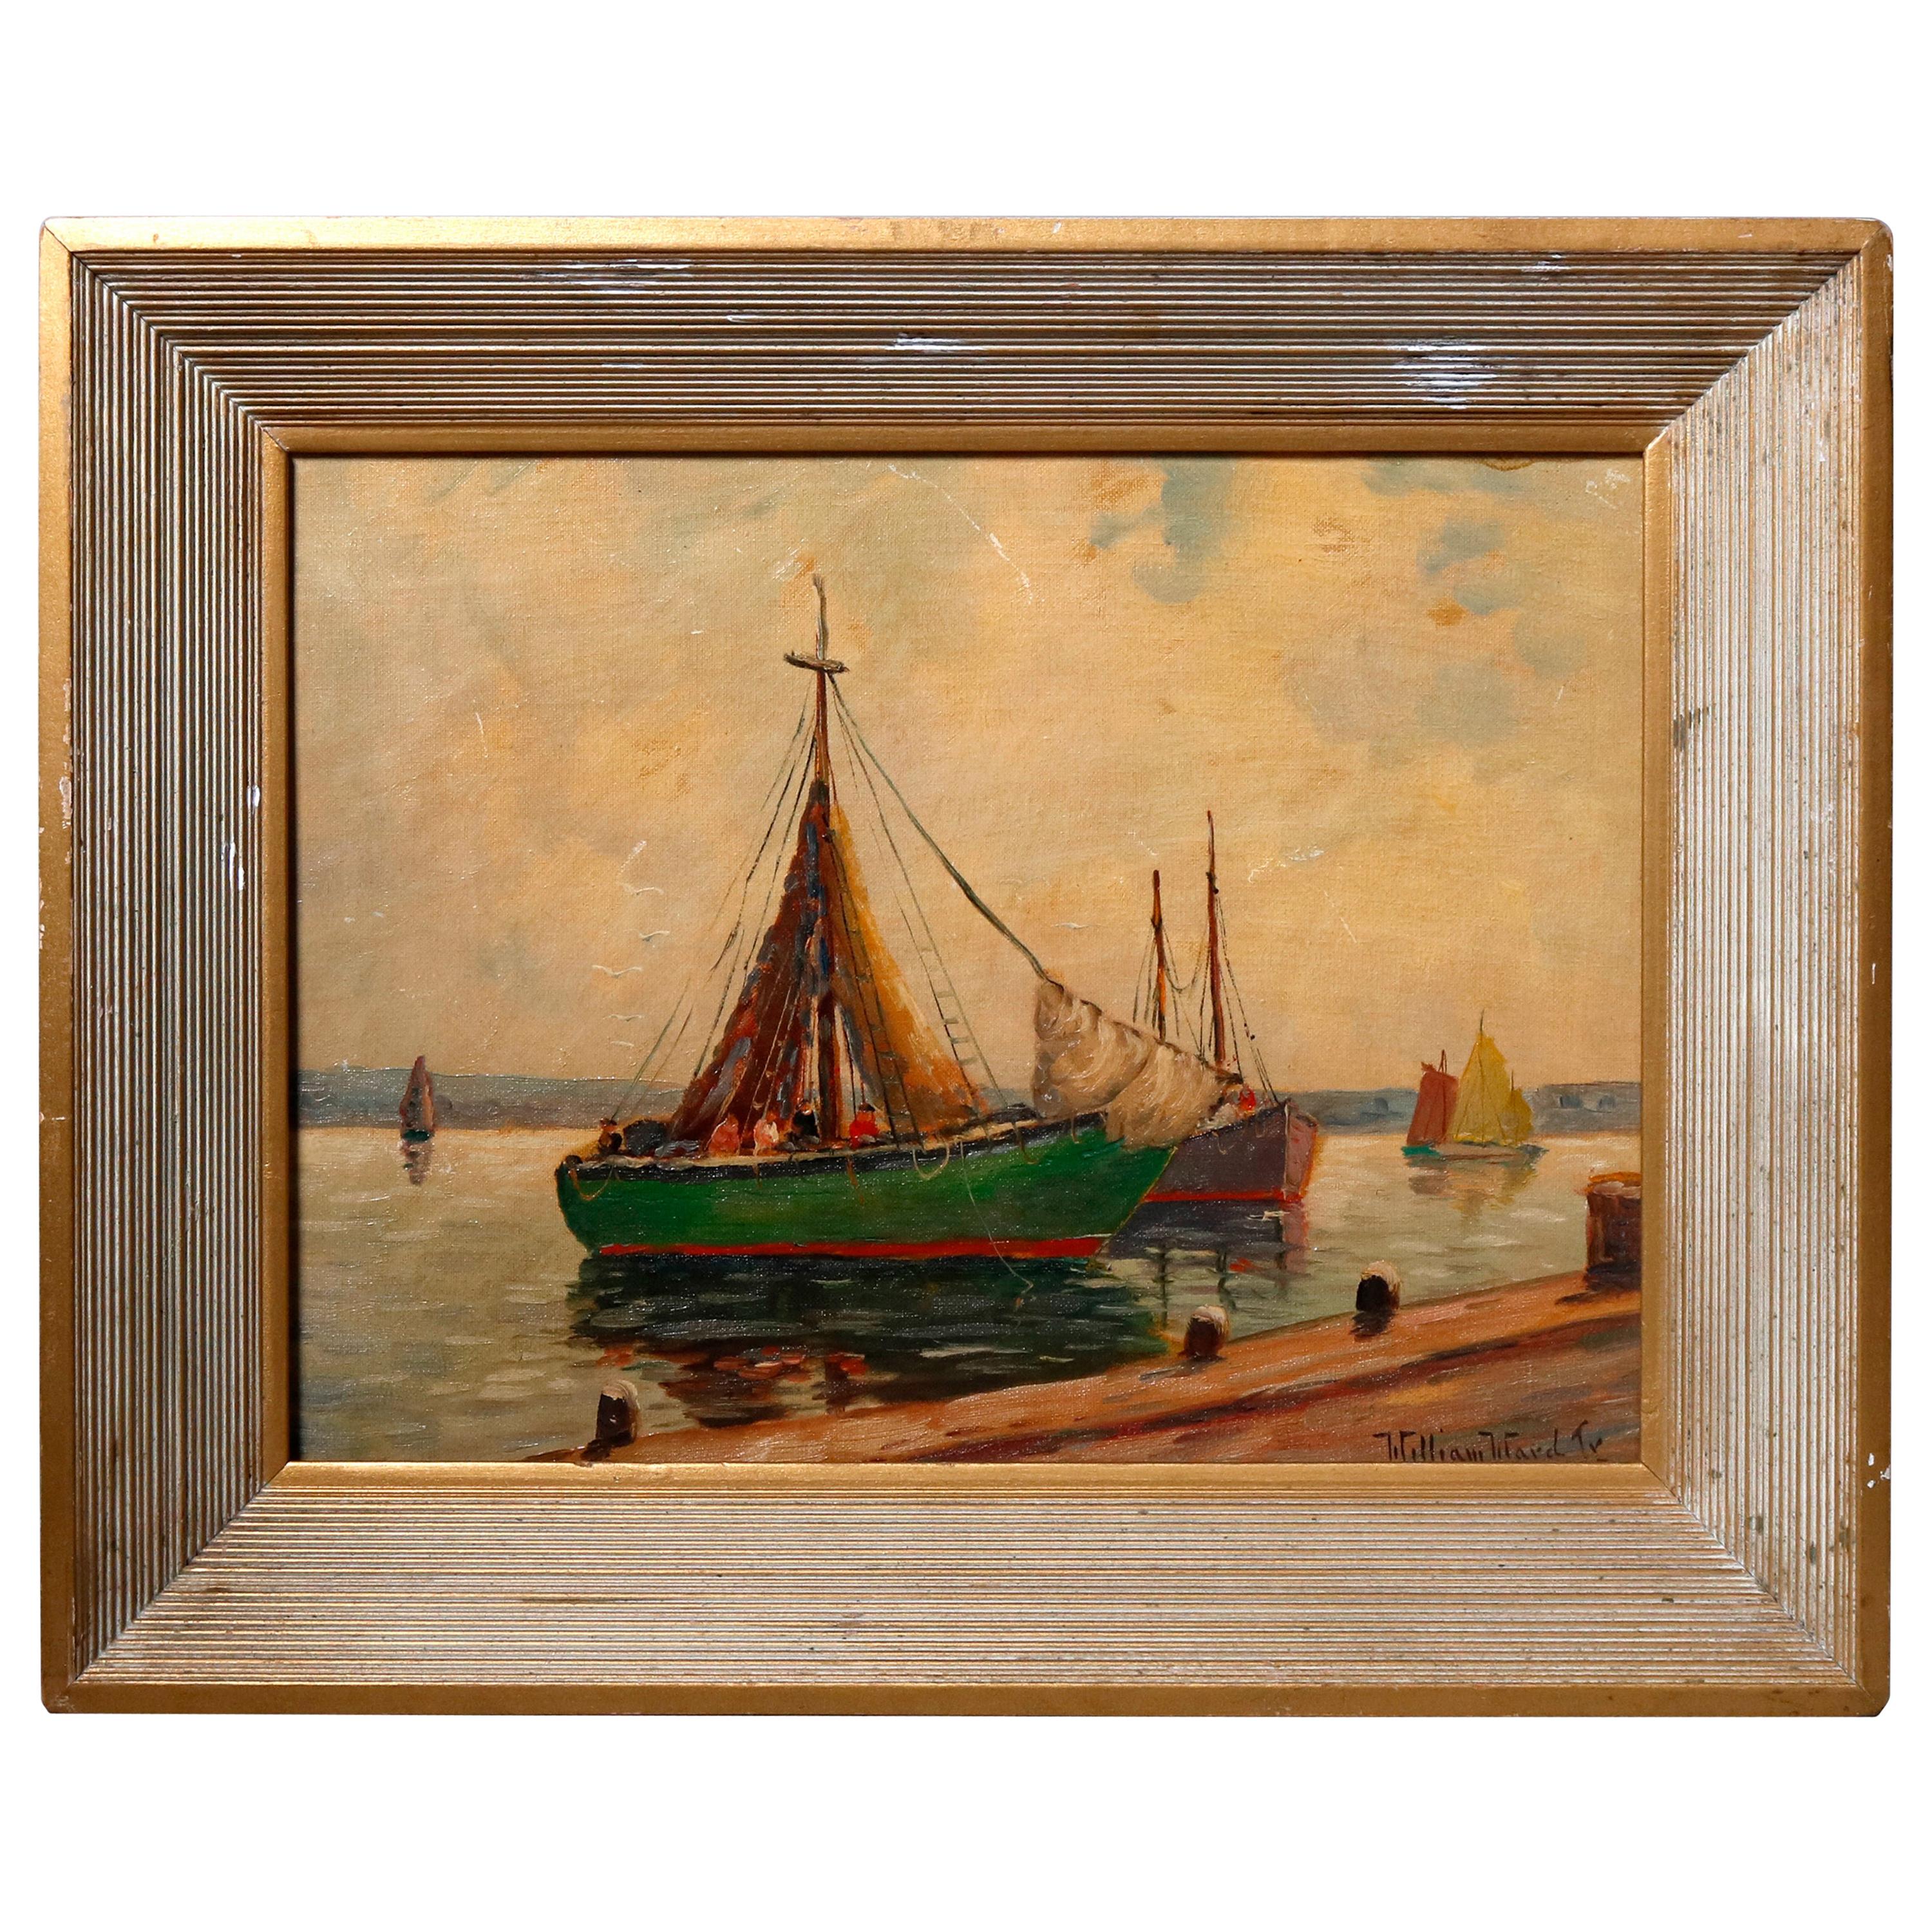 Nautical Oil on Canvas Harbor Scene with Sailboats by William Ward, circa 1930